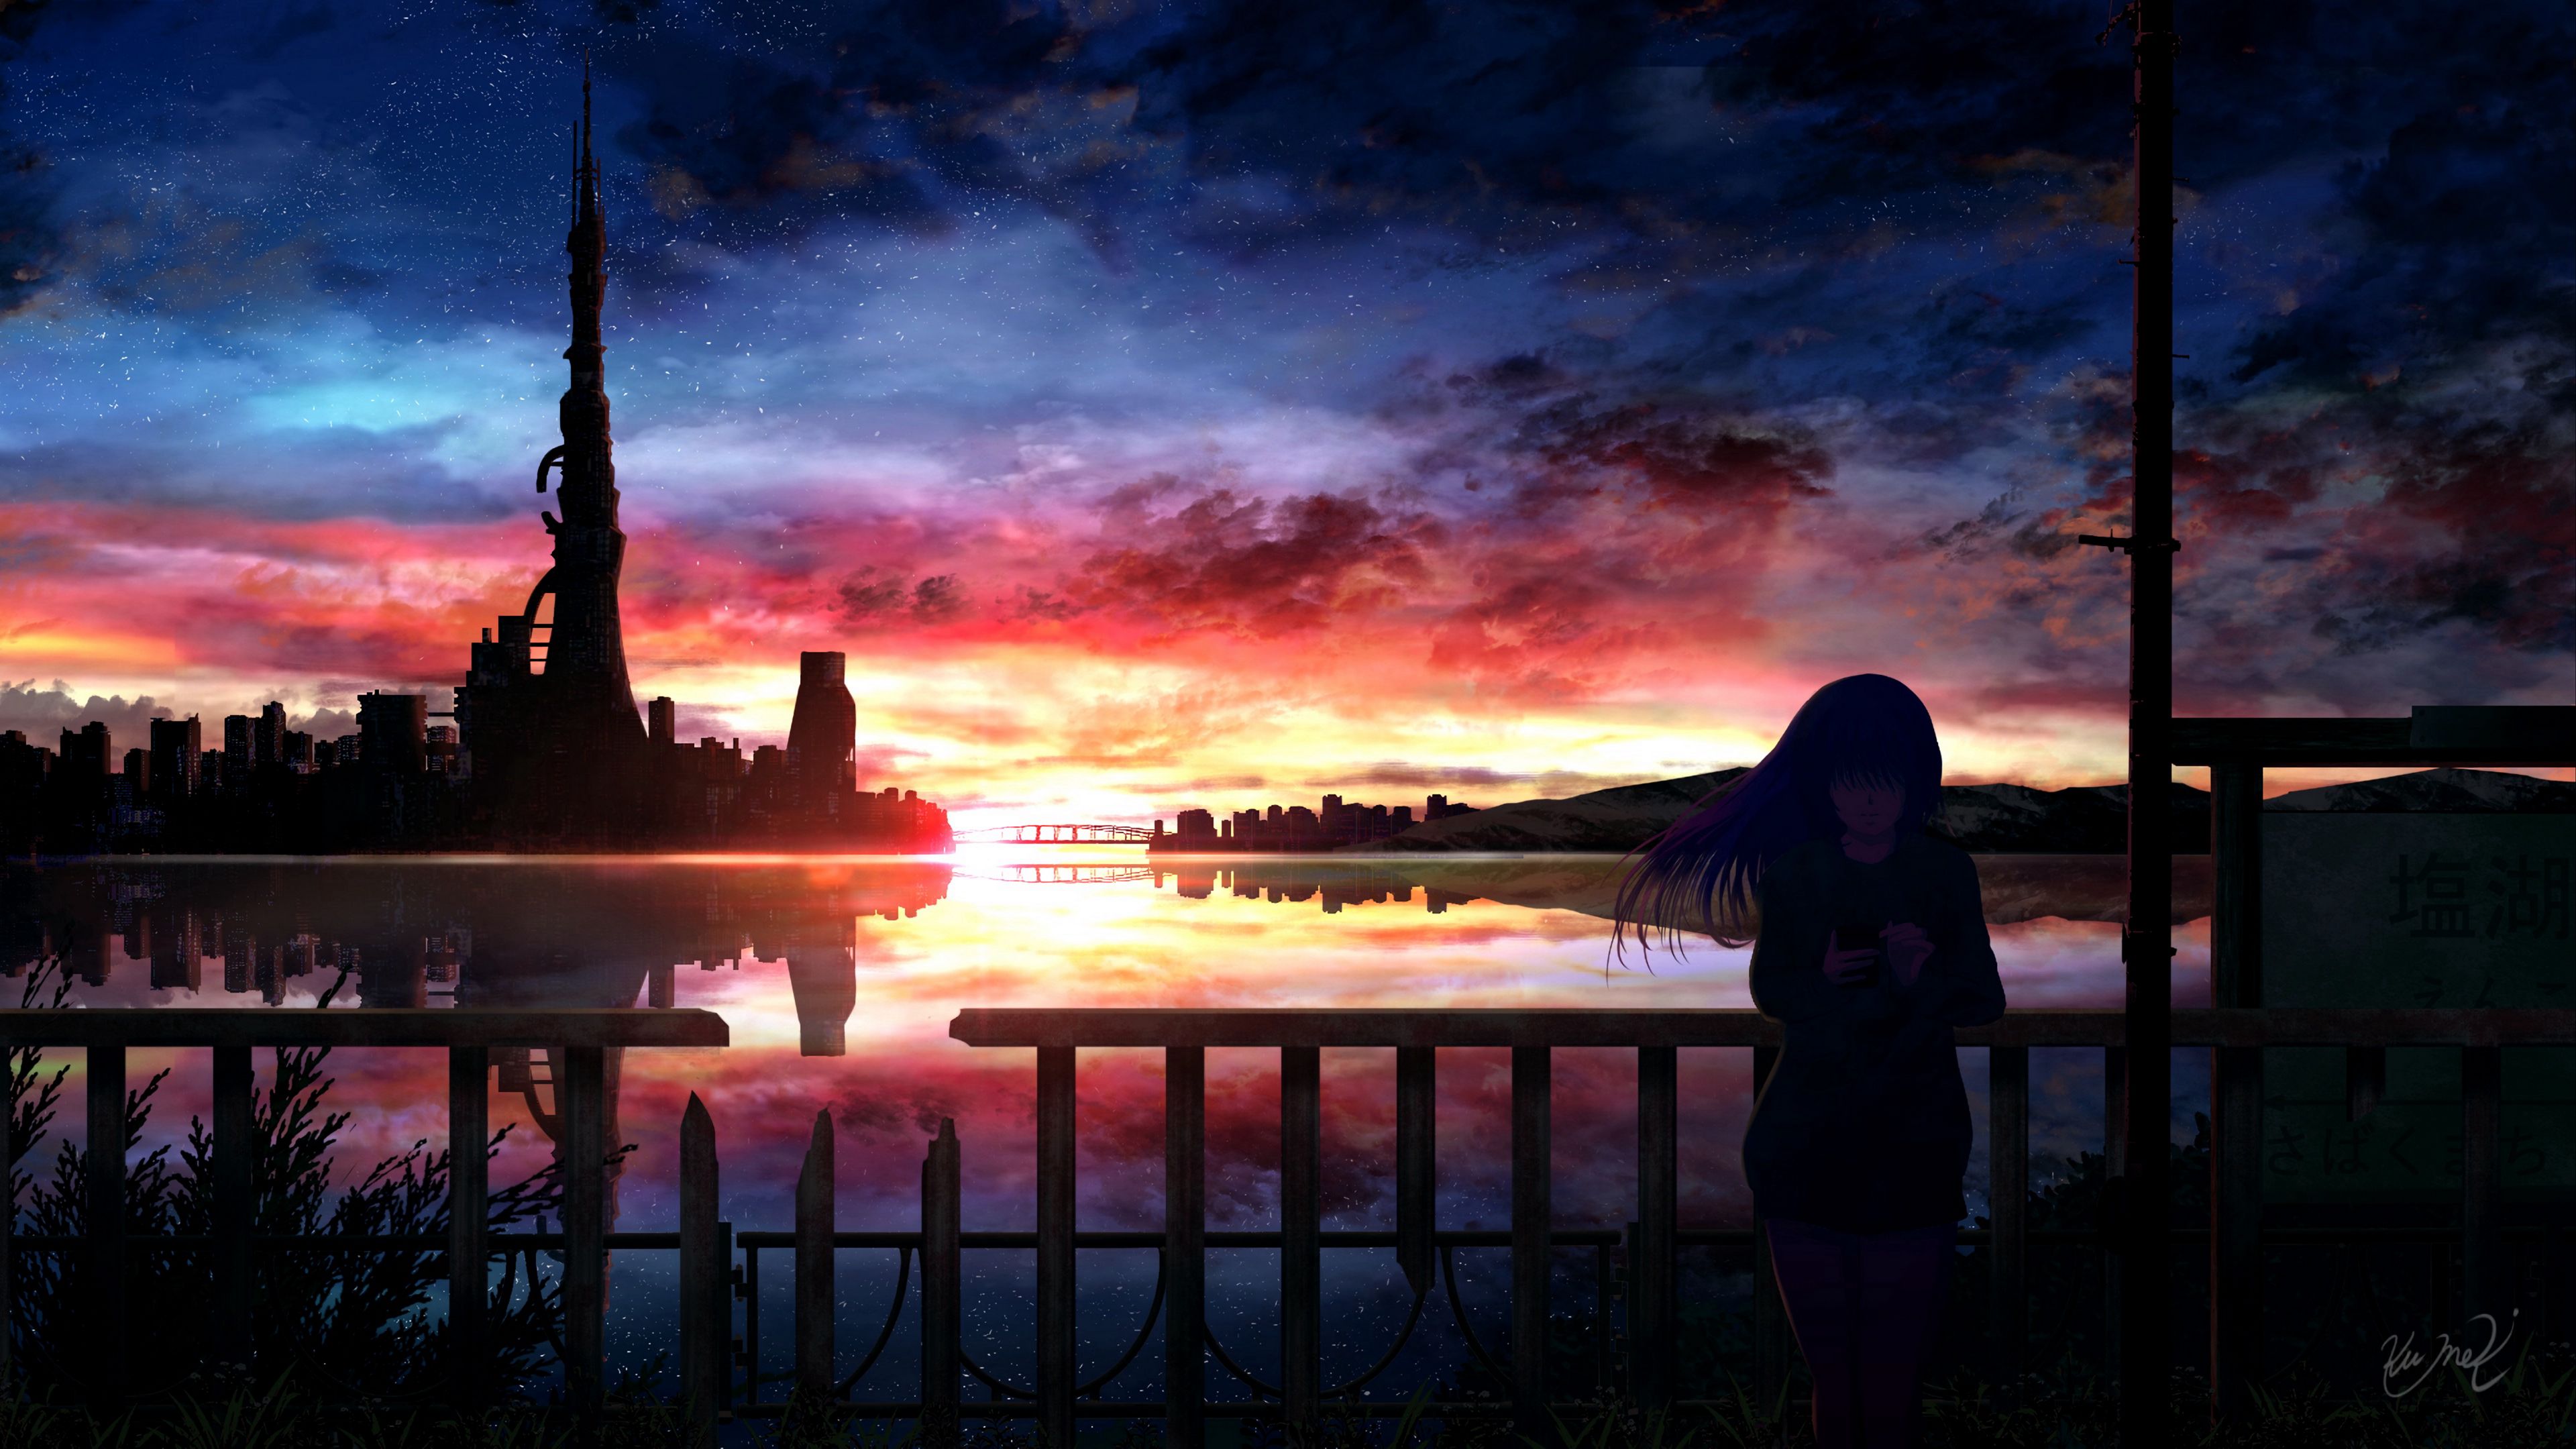 Download wallpaper x silhouette night starry sky girl anime k uhd hd background